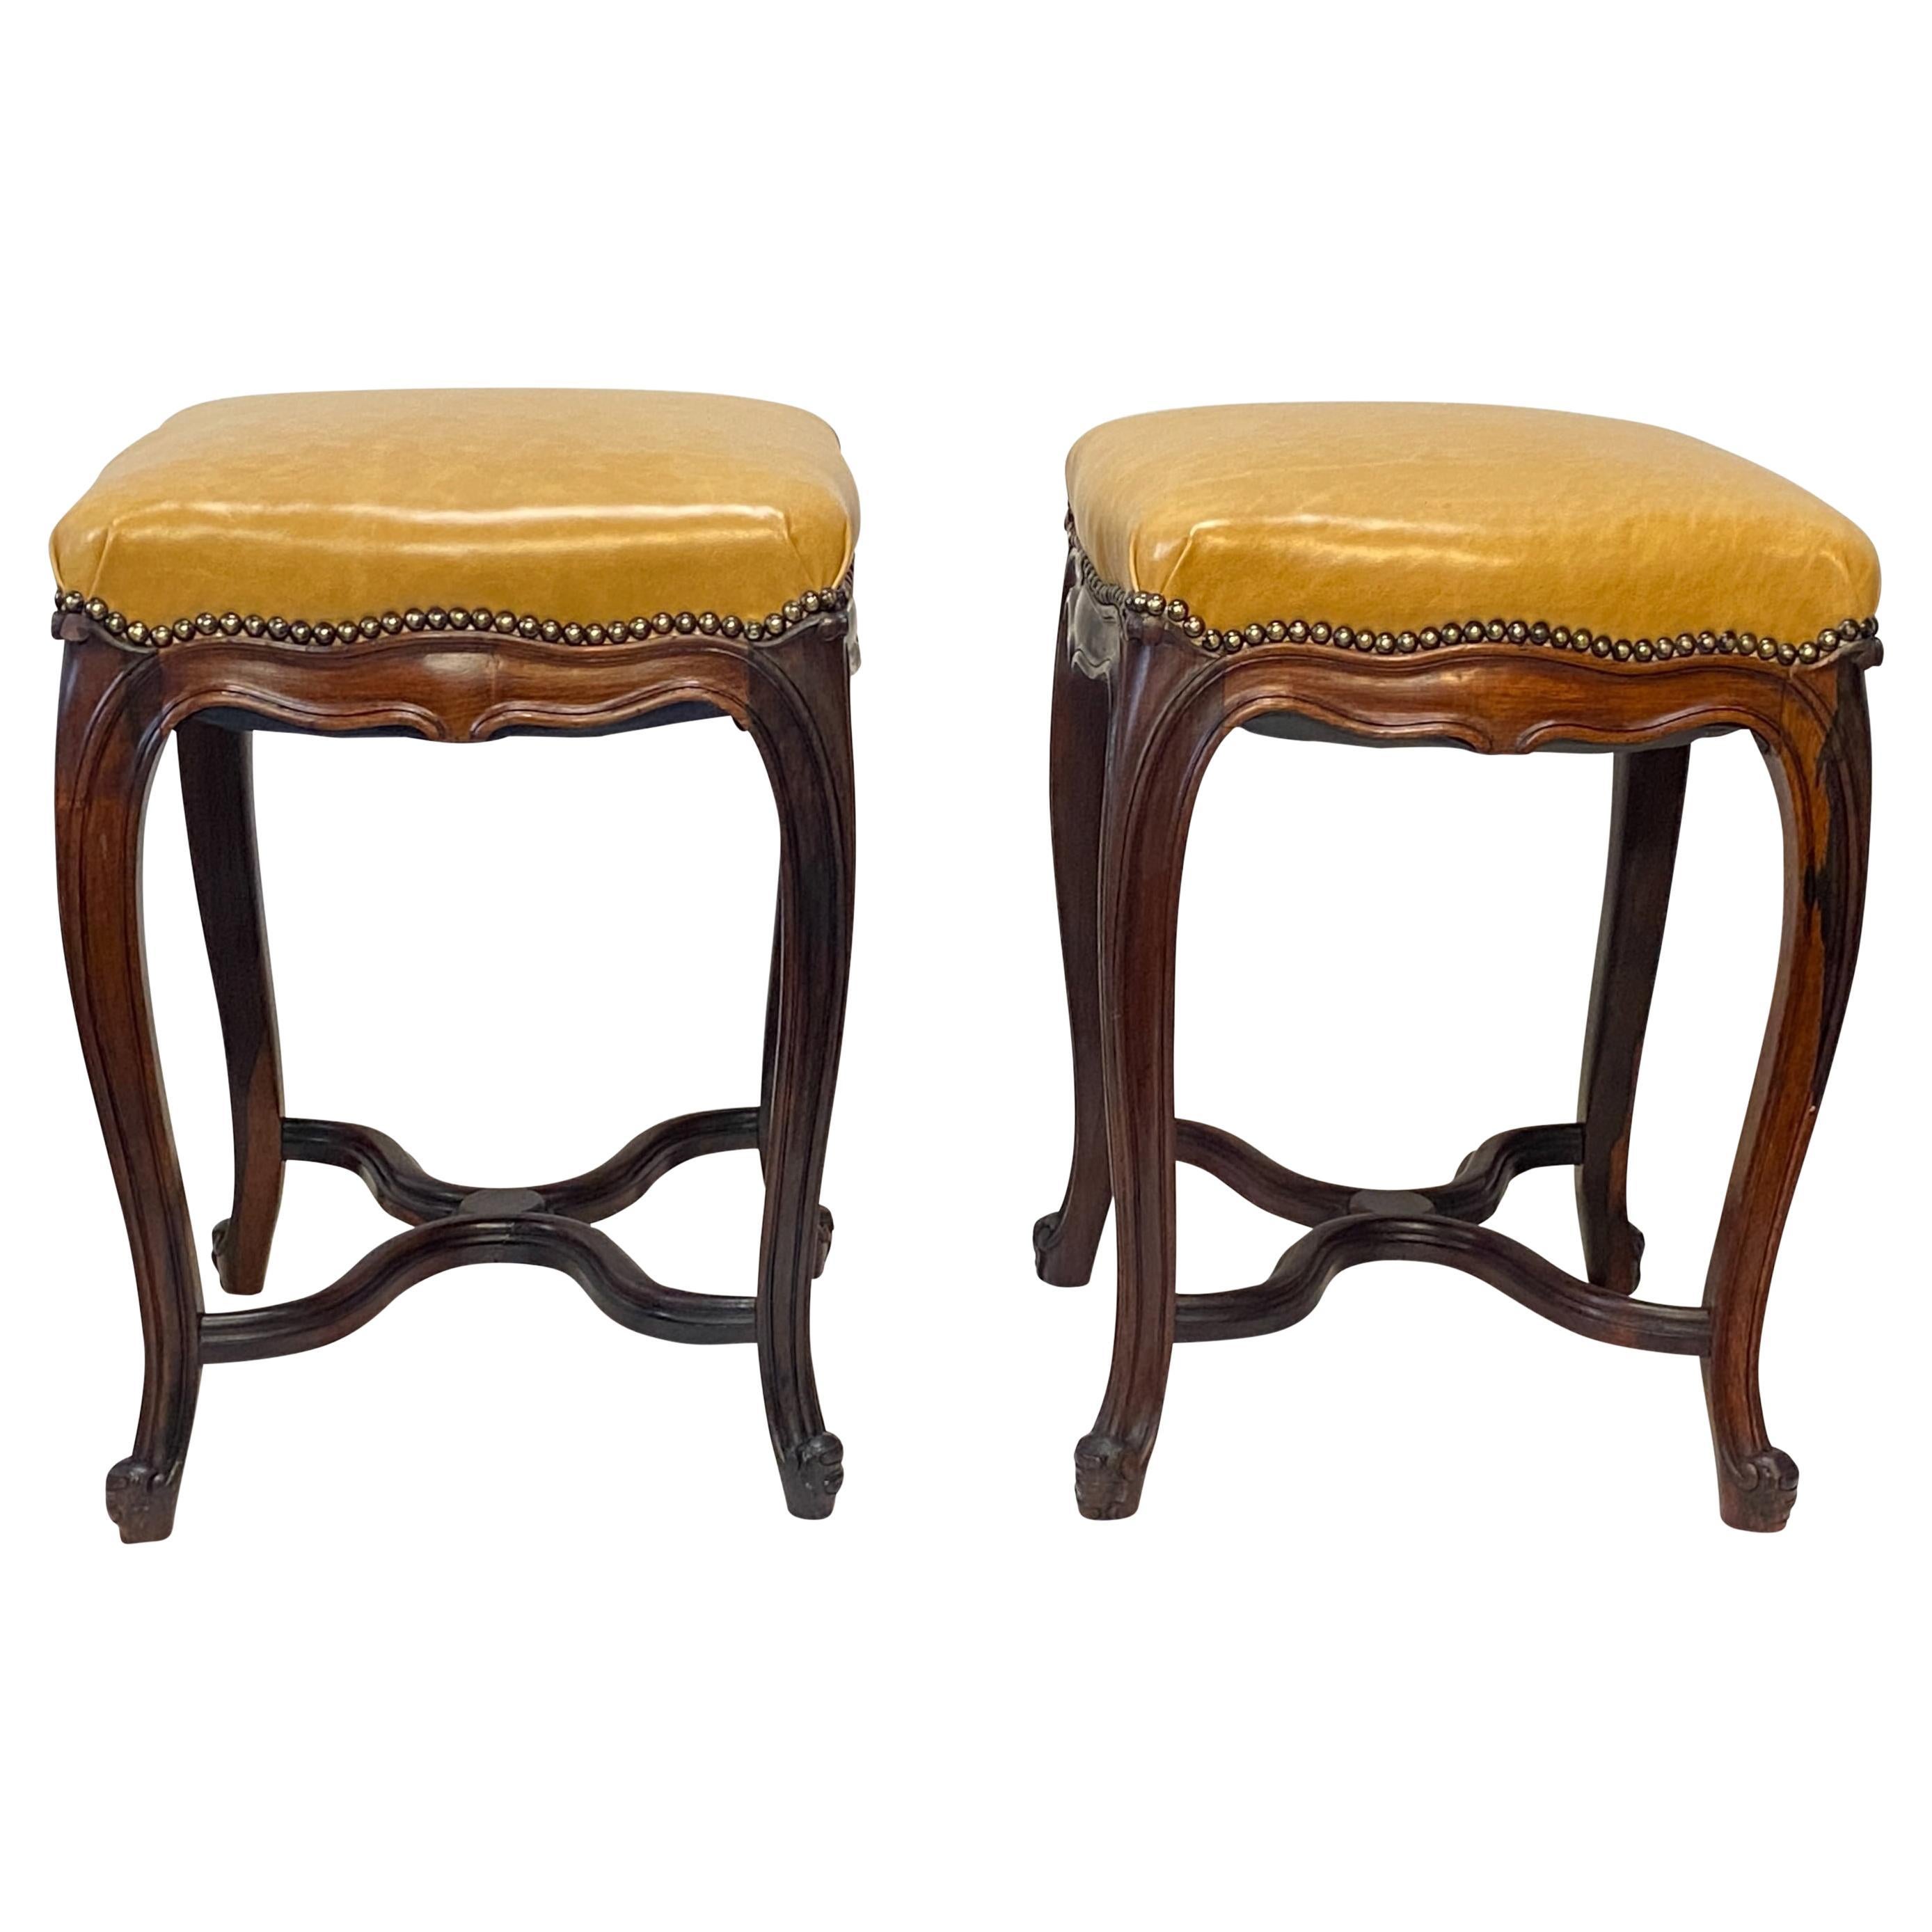 Louis XV Style Rosewood and Leather Tabouret Stools, French 19th Century For Sale